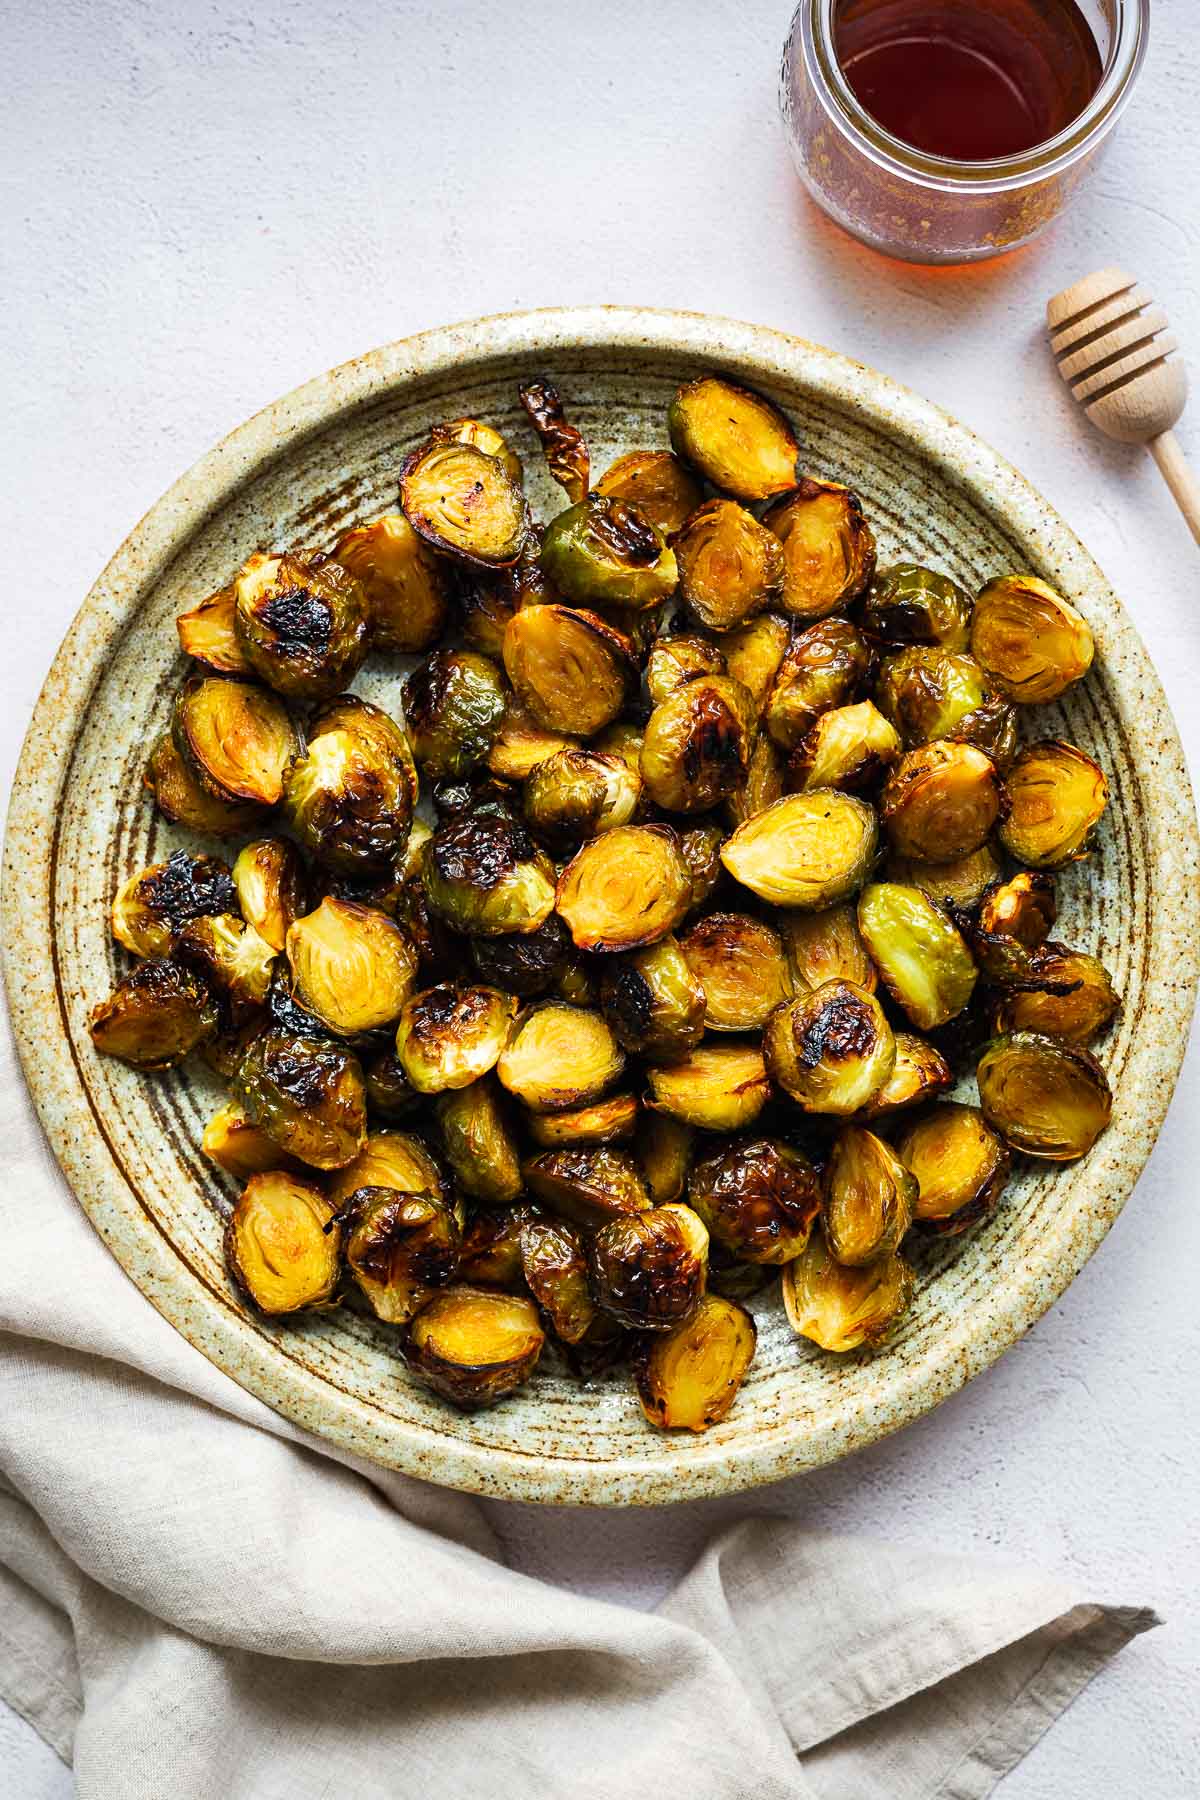 Hot honey roasted Brussels sprouts on a ceramic serving plate viewed from above next to a jar of hot honey.